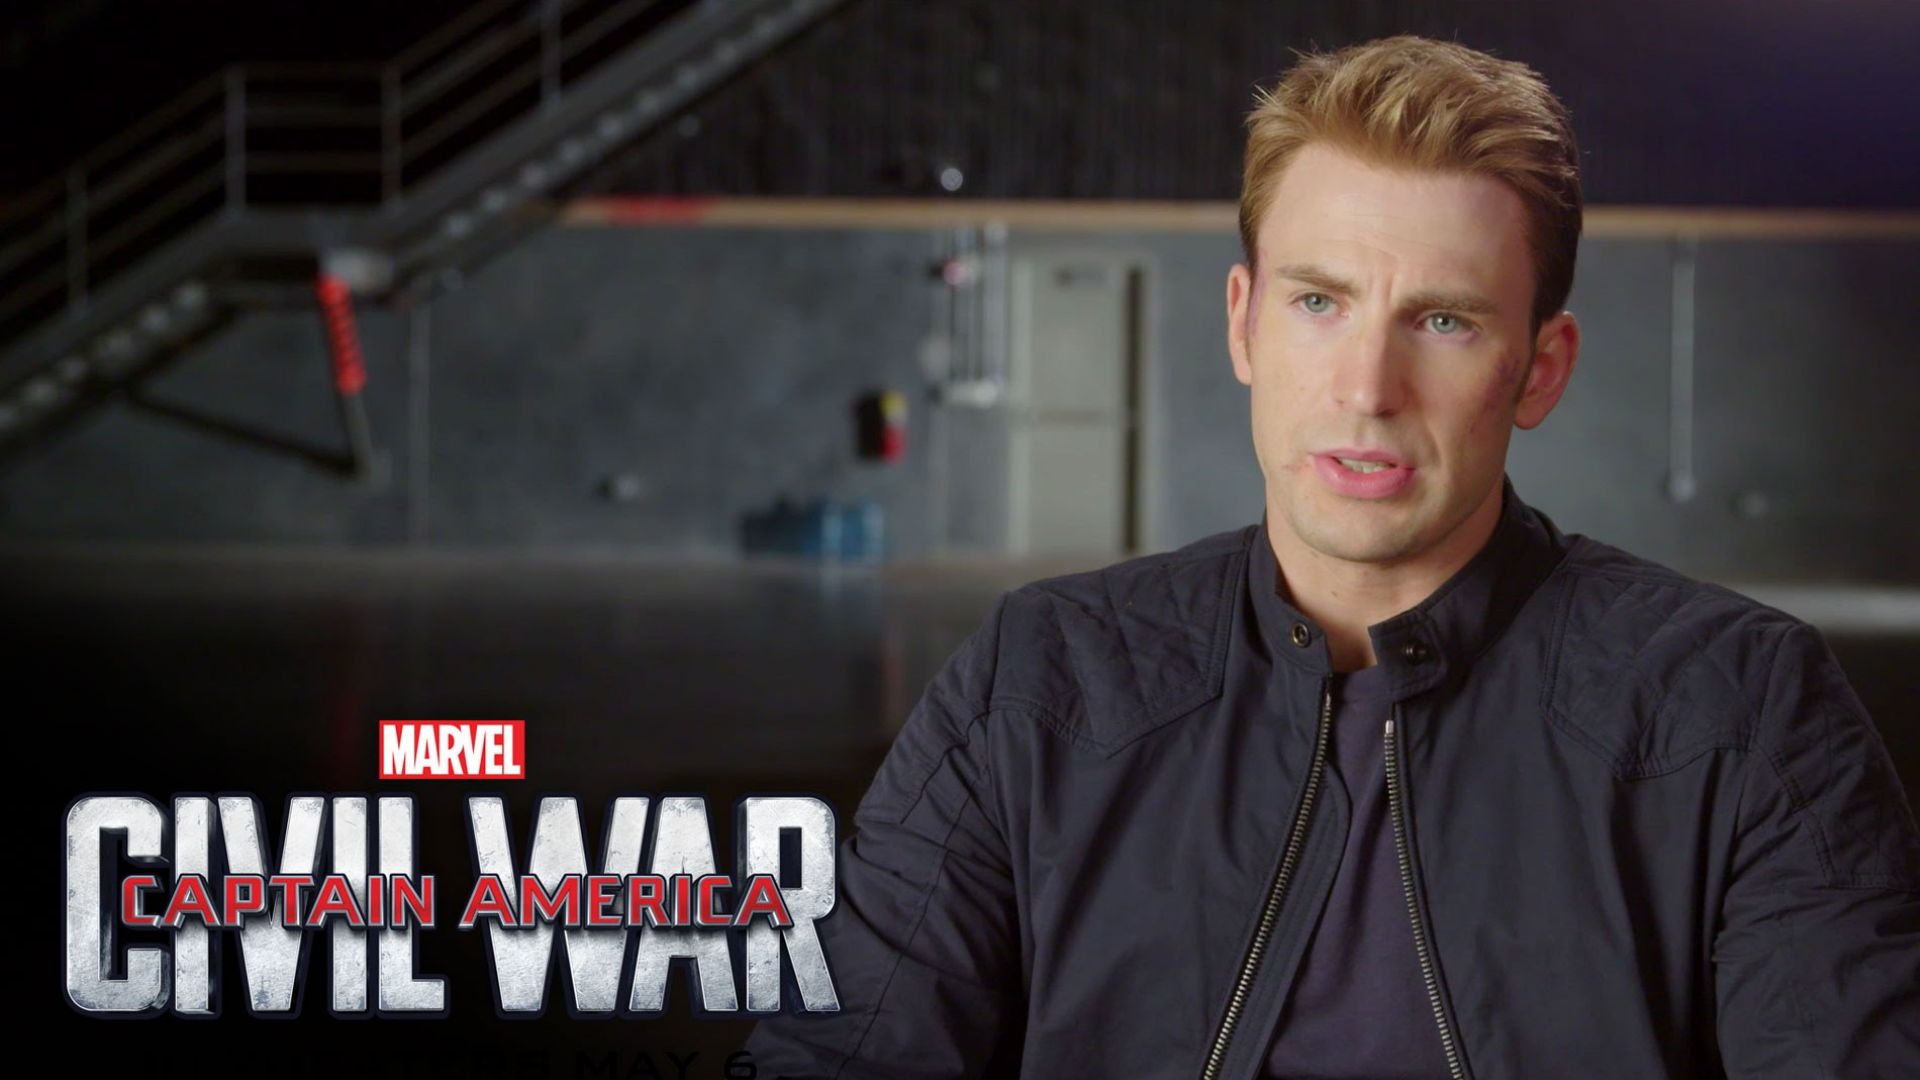 &#039;Brothers In Arms&#039; Marvel&#039;s Captain America: Civil War Featu